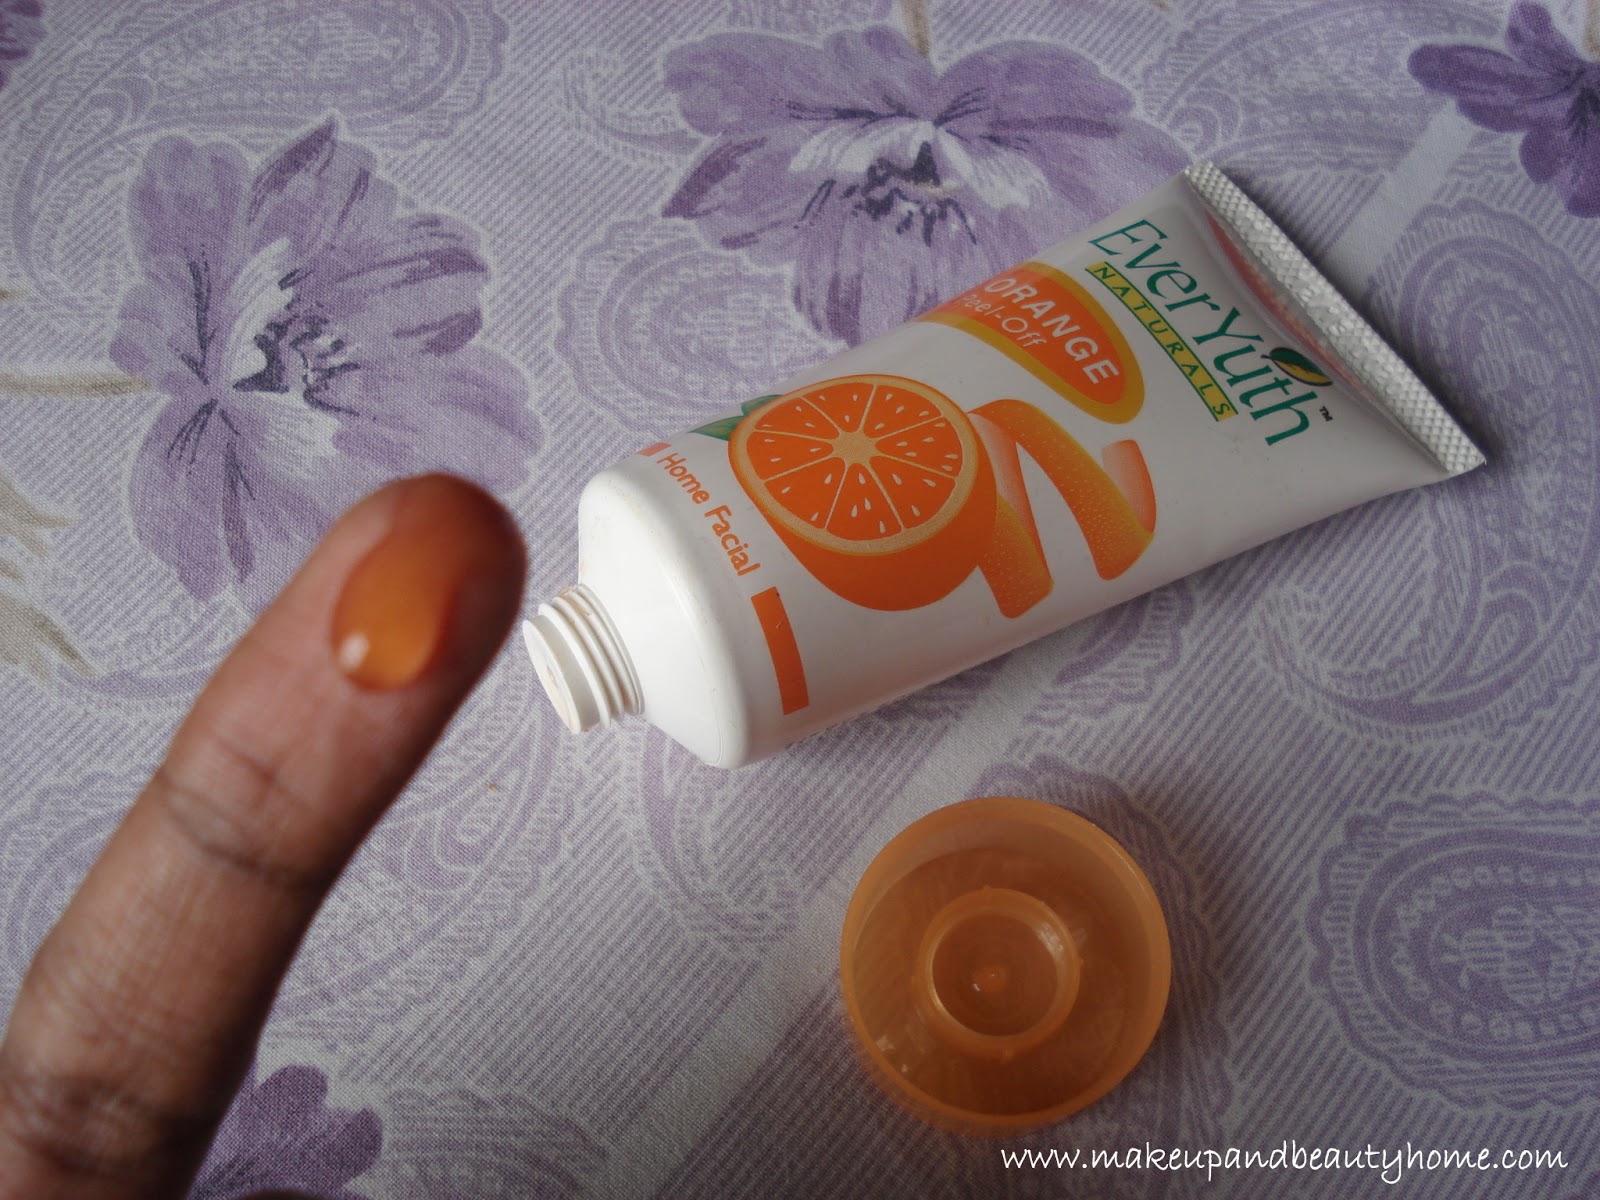 Everyuth Naturals Orange Peel Off Home Facial Review and Swatches